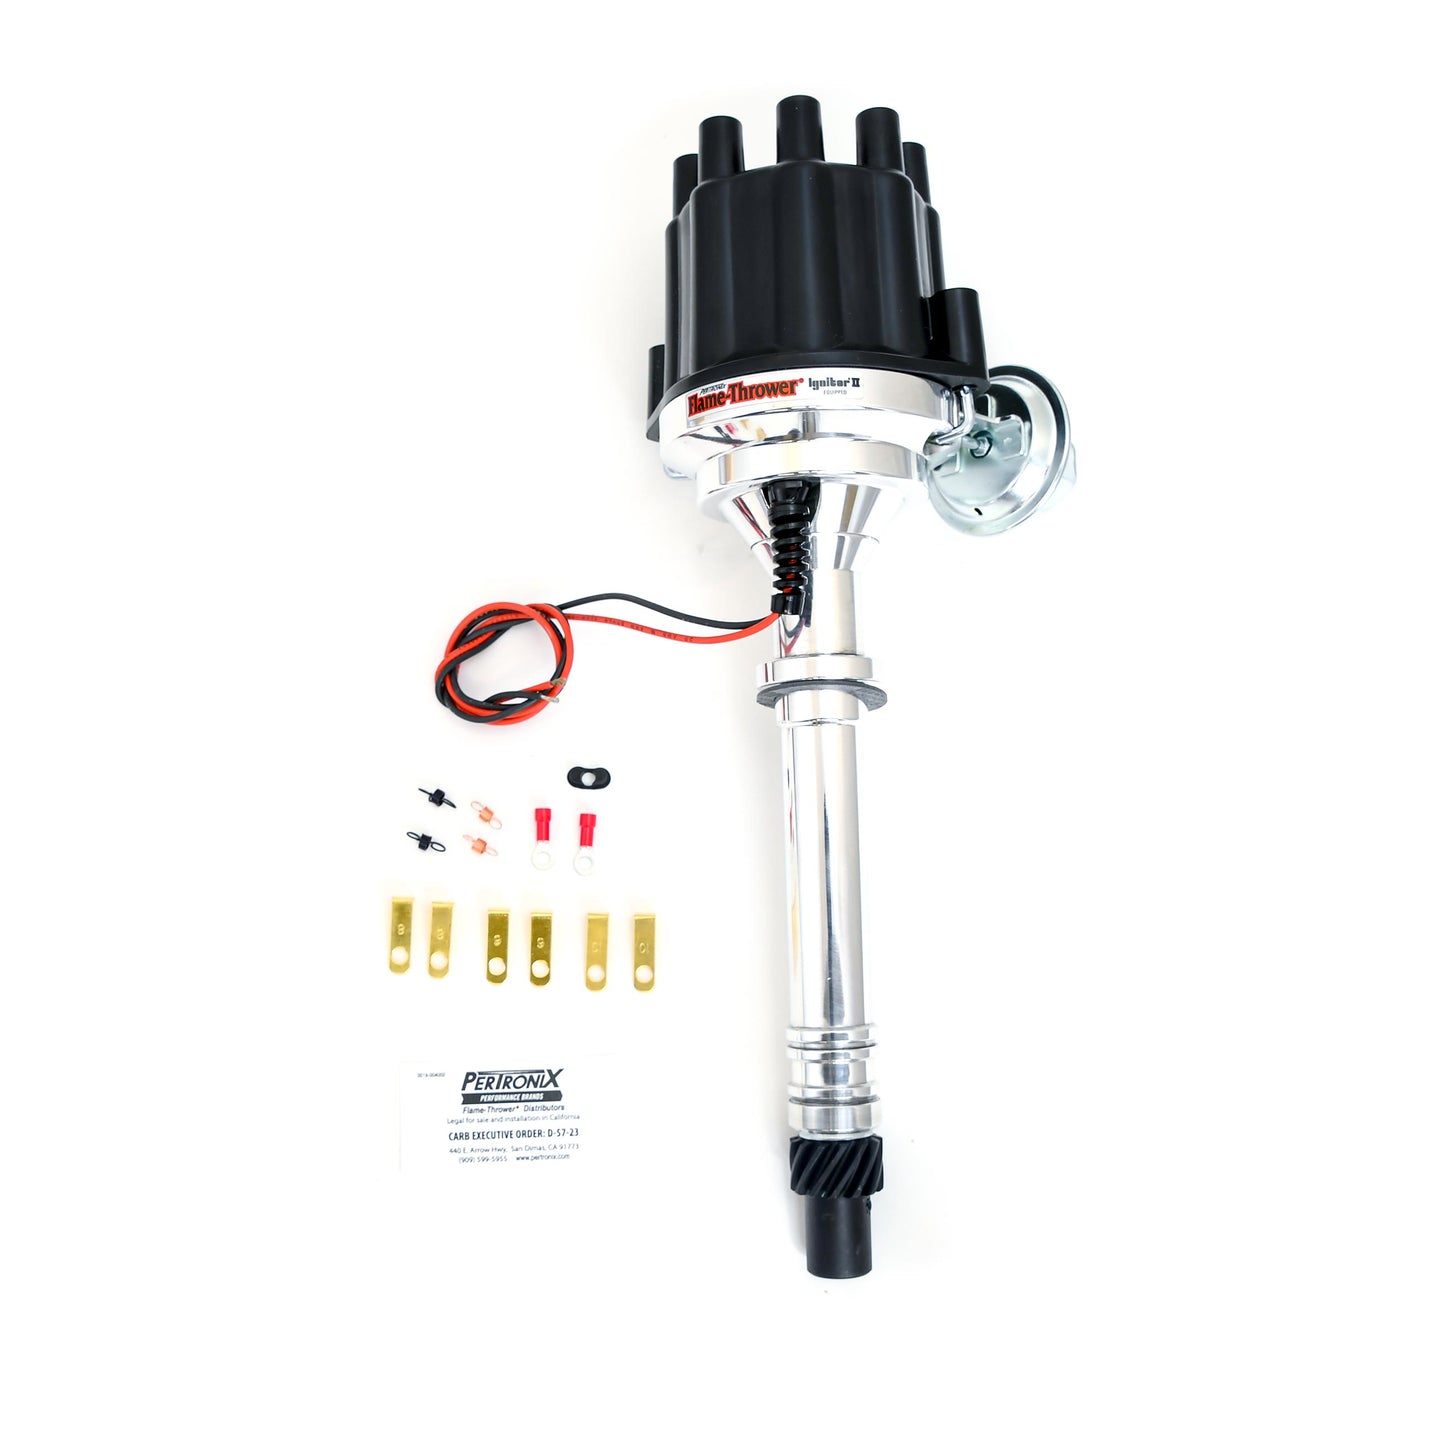 Pertronix Bundle001 Ignition Kit includes Chevy SB/BB Billet Plug n Play Distributor with Black Female Cap, Flame-Thrower II Chrome Coil, Flame-Thrower MAGx2 Universal Black Spark Plug Wires with 90 degree plug boot ends